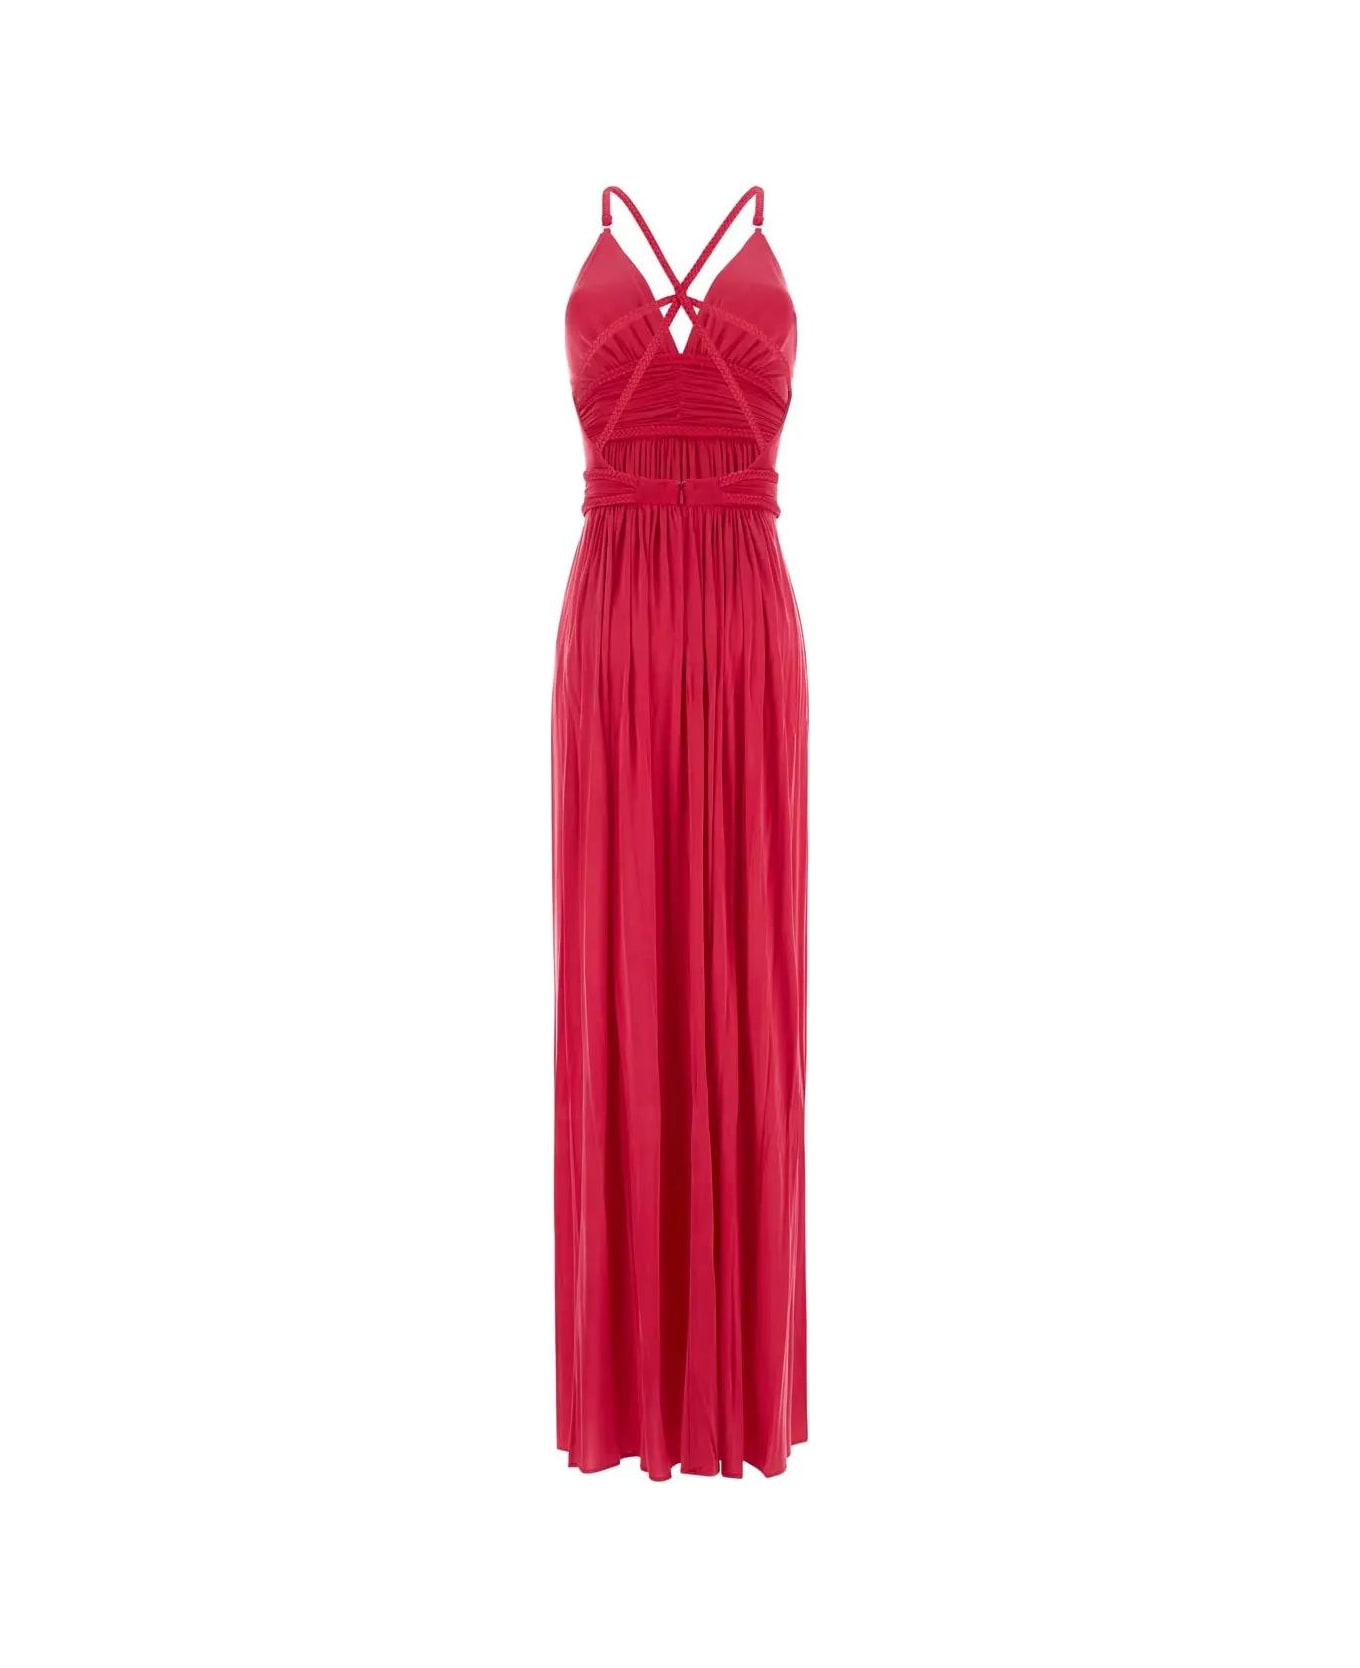 Elisabetta Franchi Red Carpet Dress With Intertwined Straps - PINK